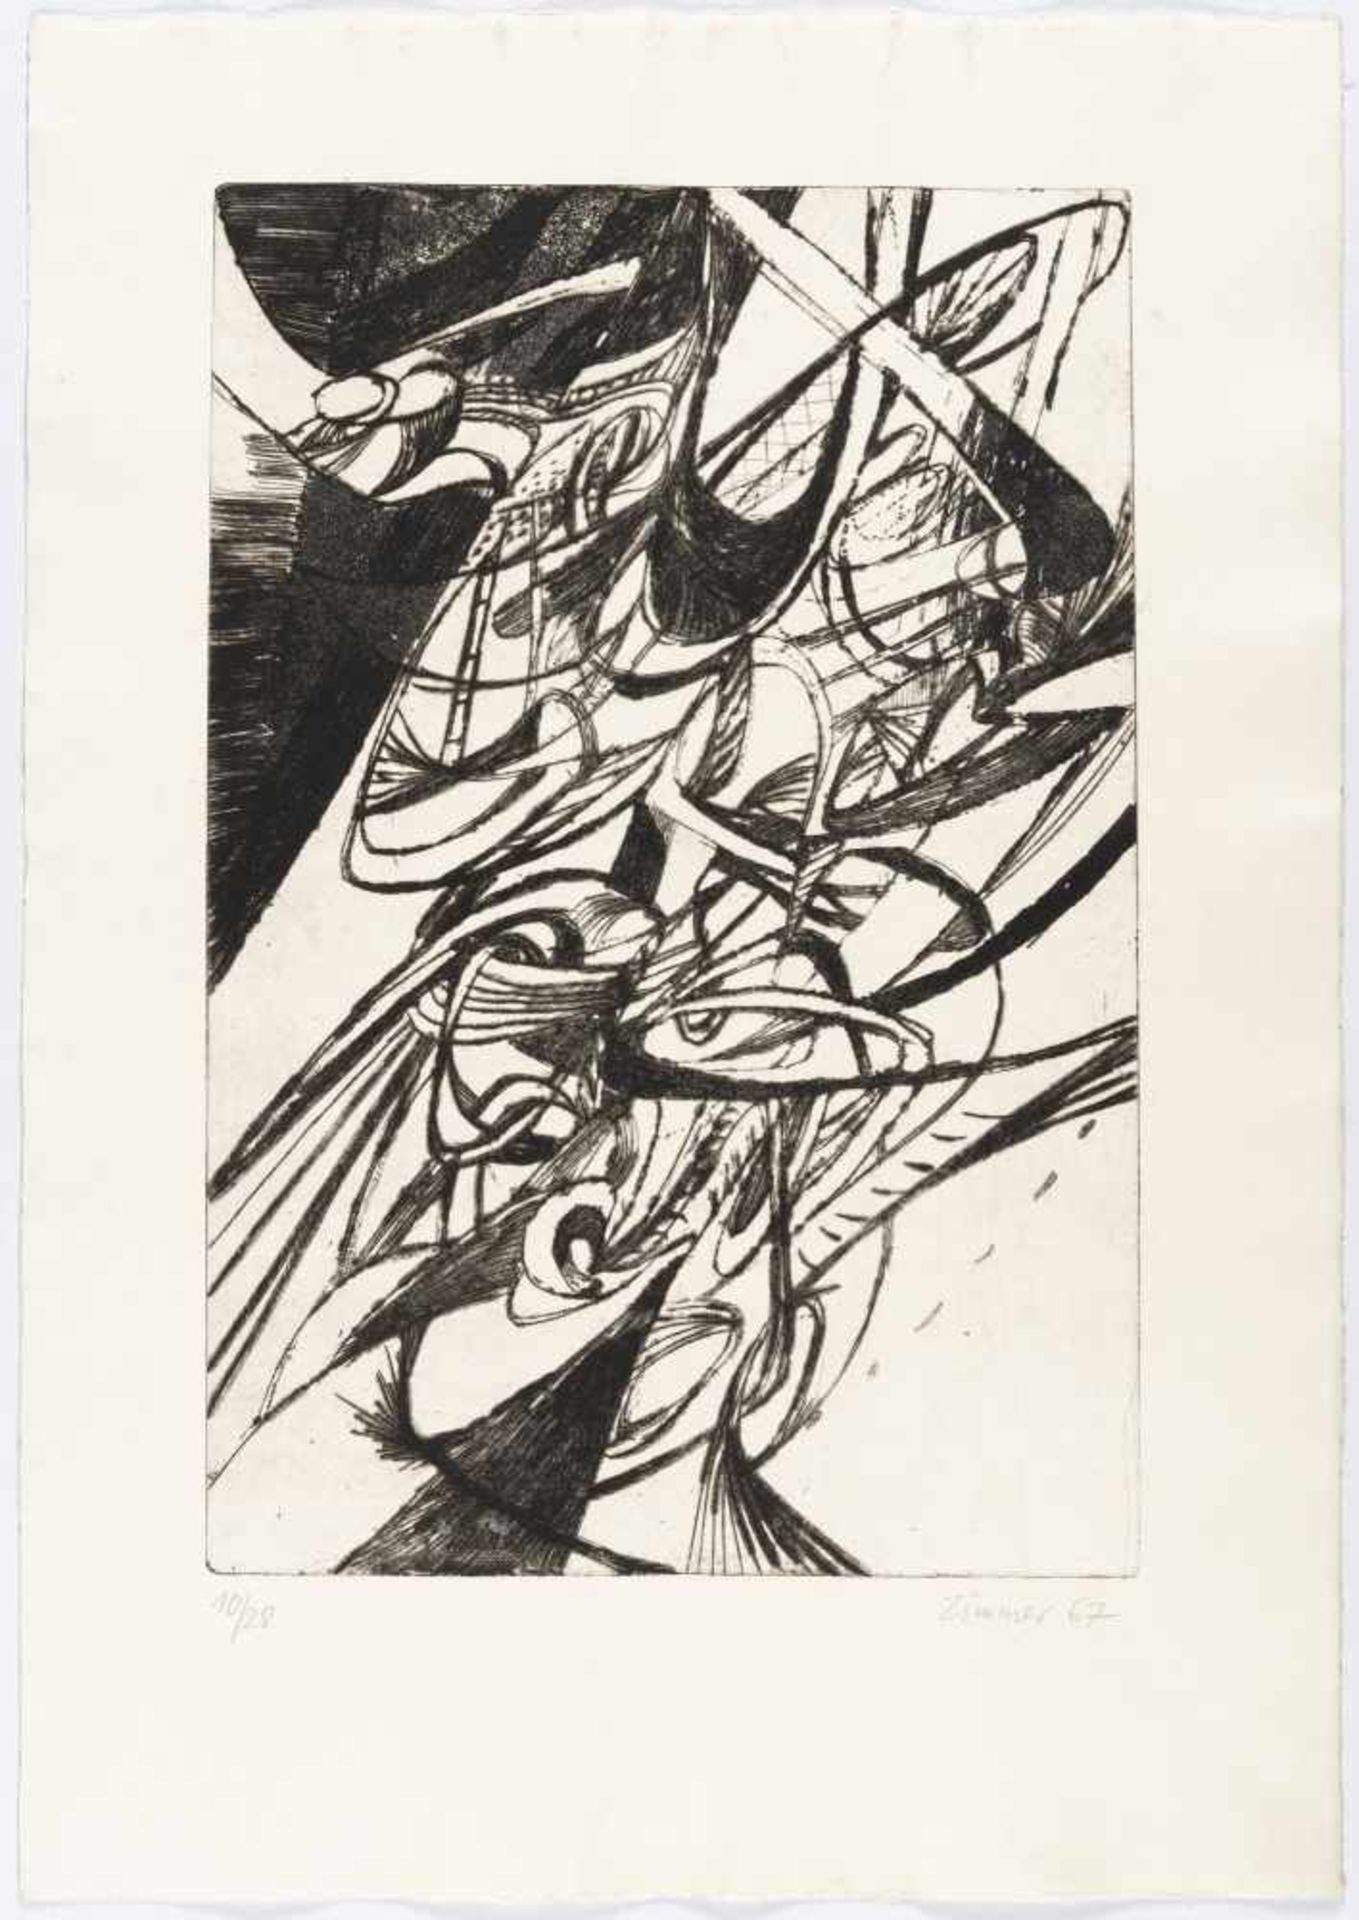 6 sheets from: MeshFolder with six etchings by various artists on copperplate paper. (1967). C. 54 x